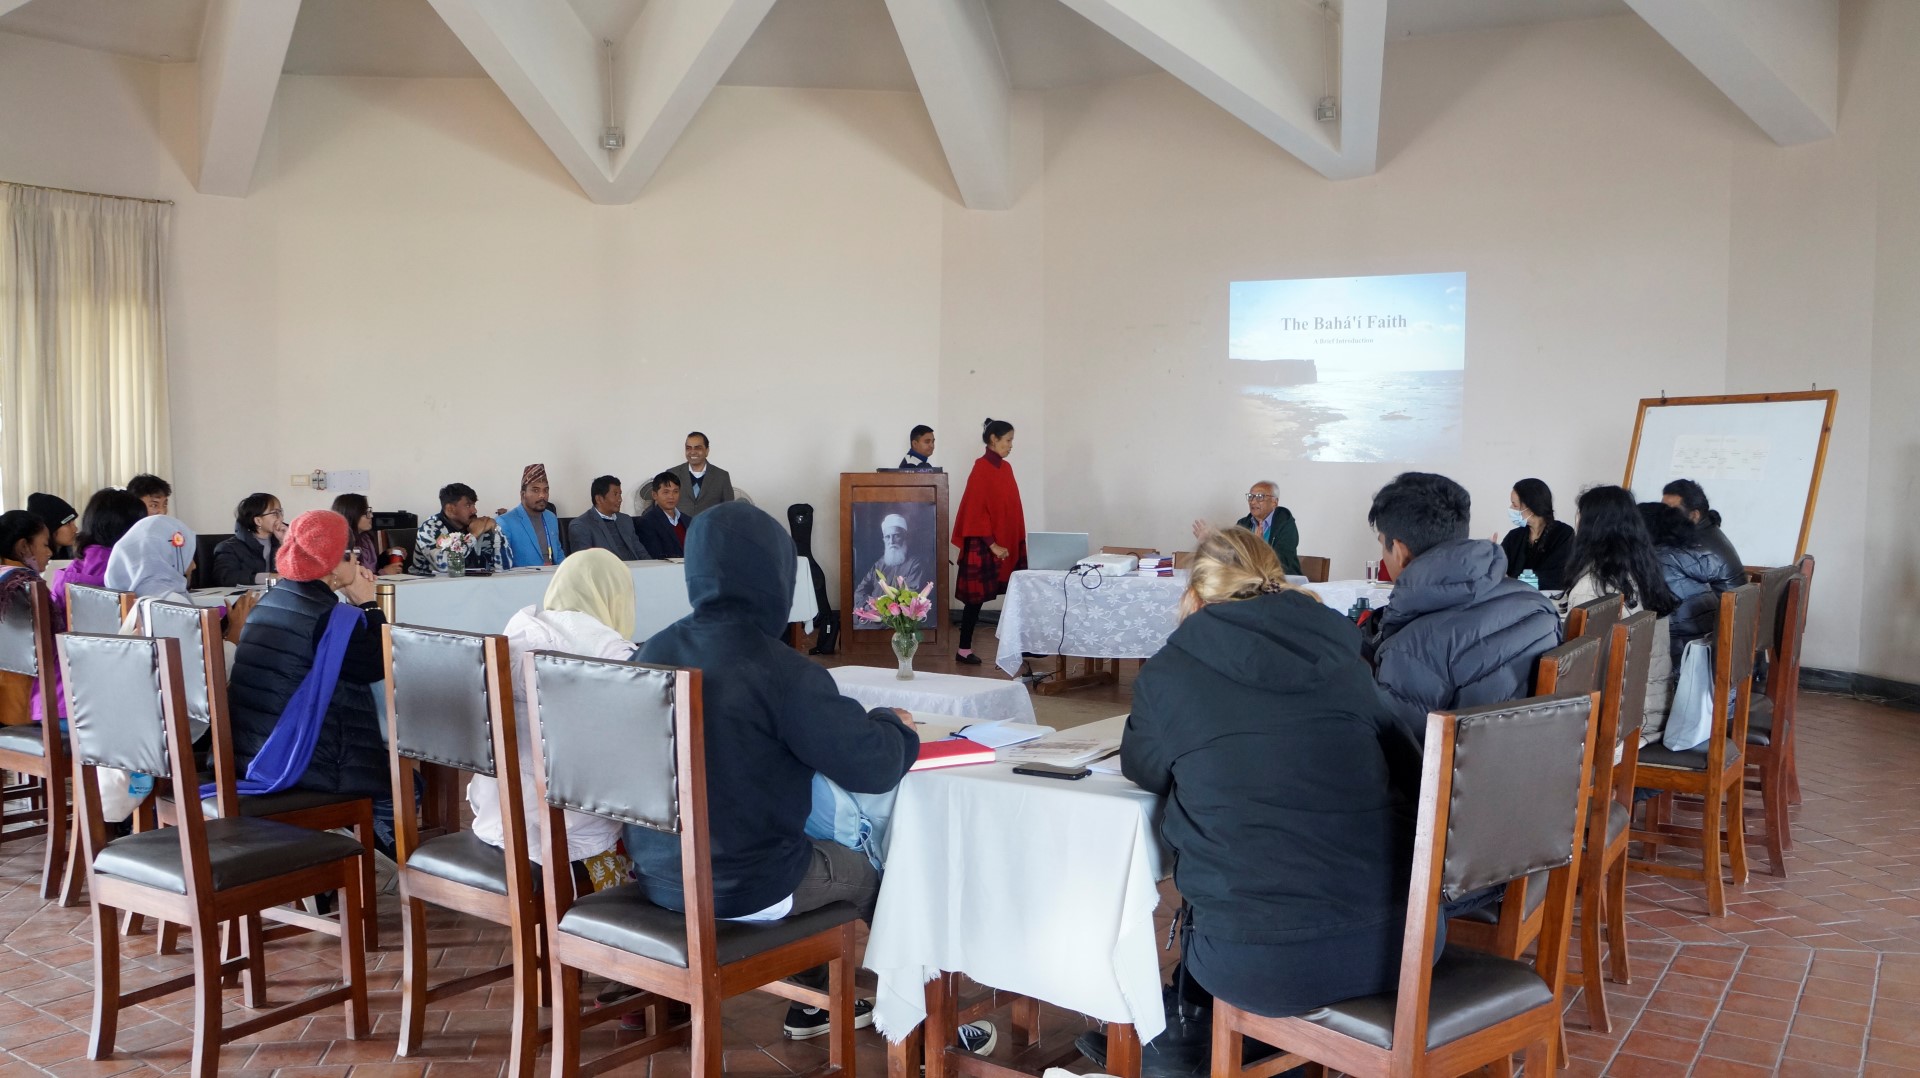 School of Peace in Nepal 2nd Weekly News Round-Up